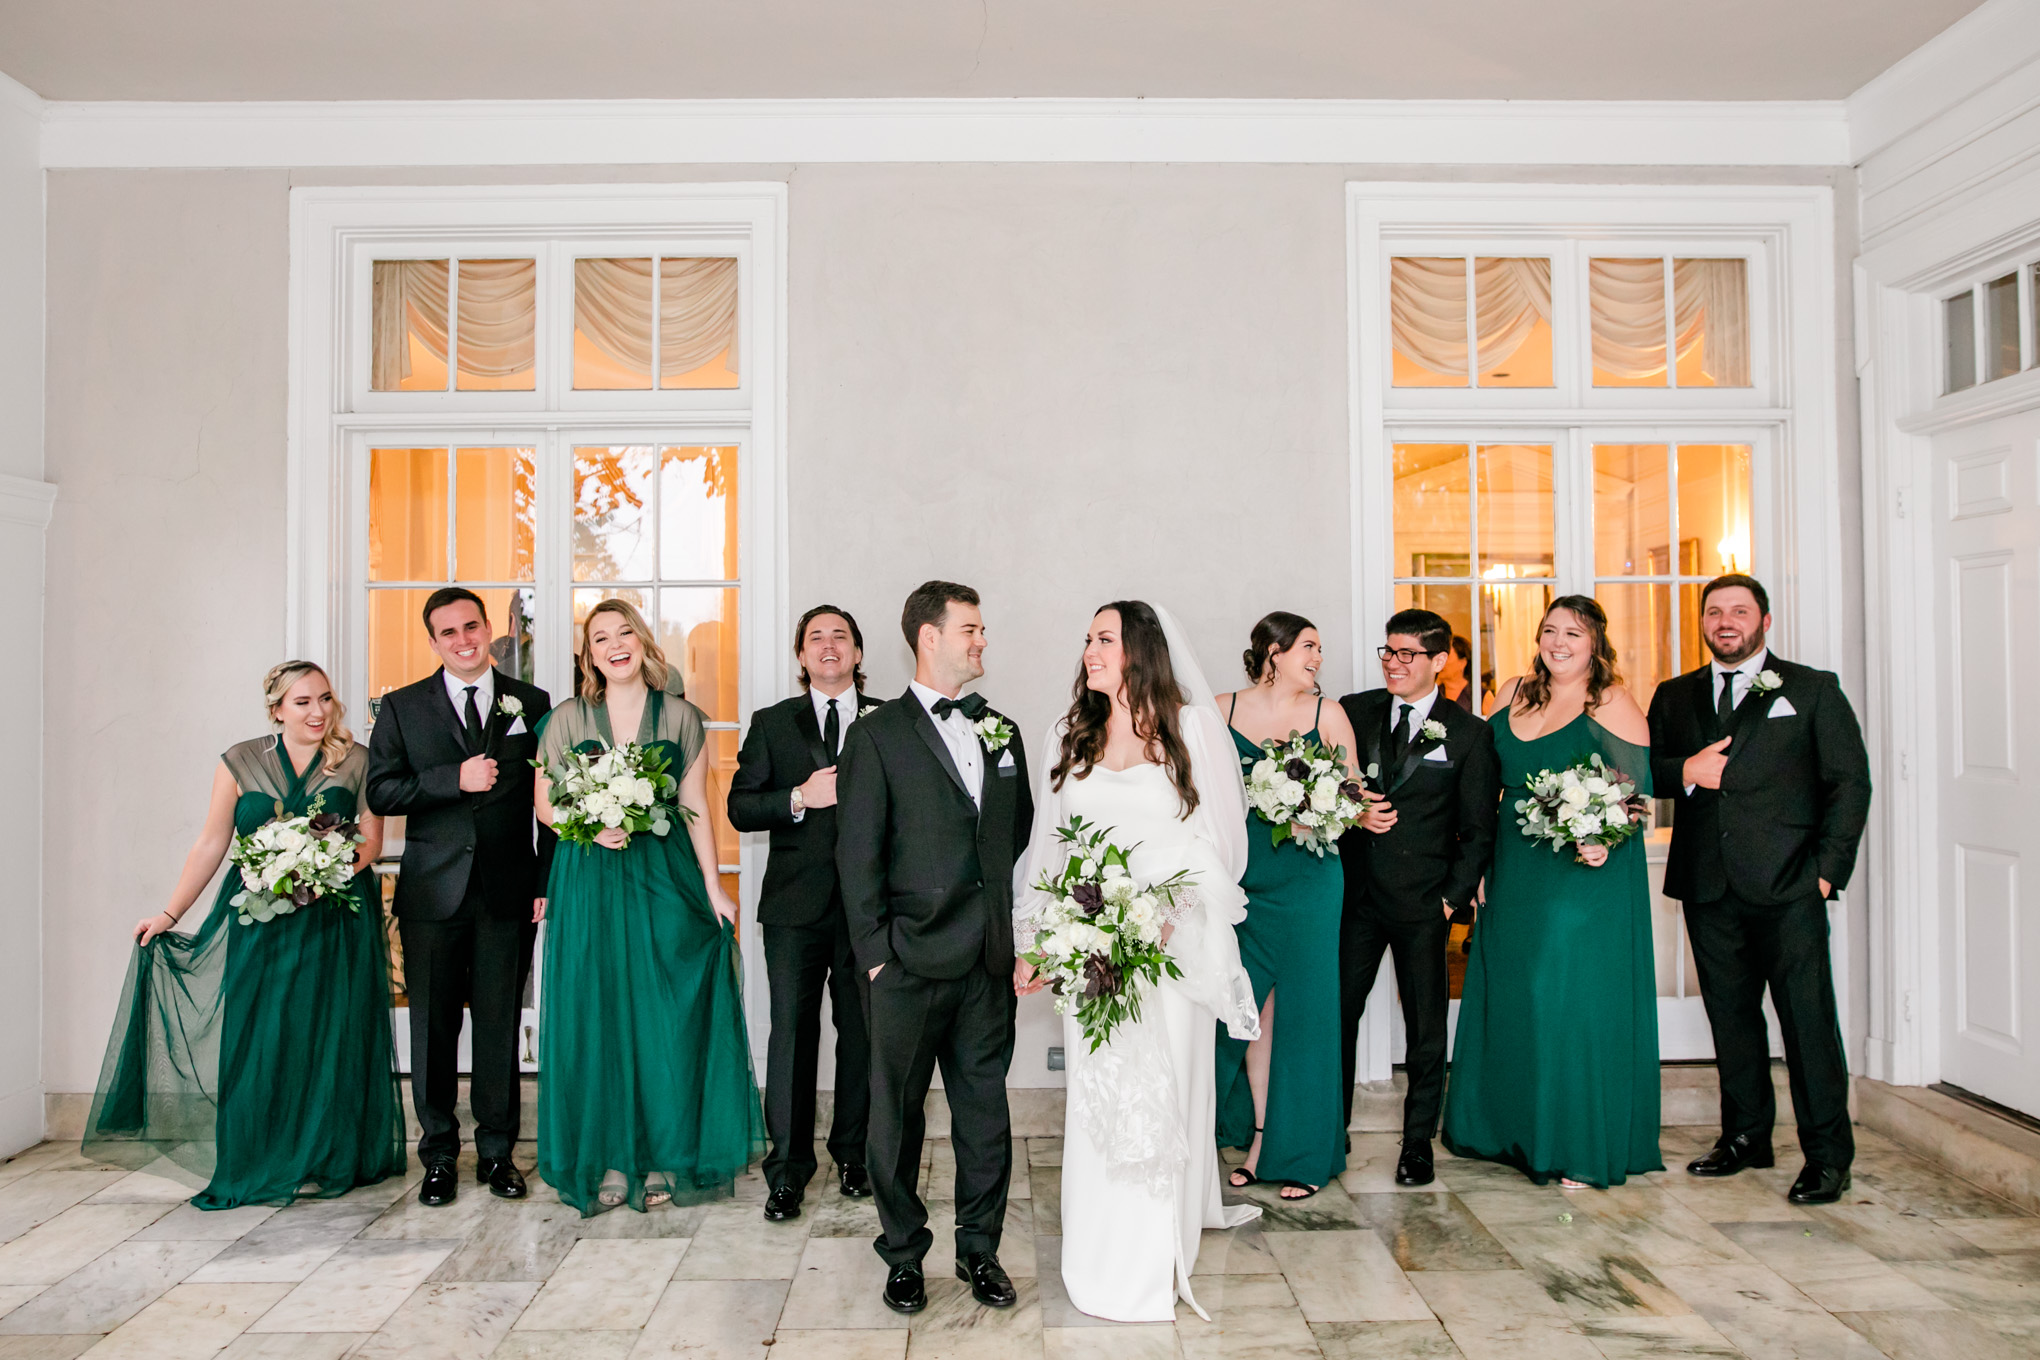 emerald and ivory Woodend Sanctuary wedding, autumn Woodend Sanctuary wedding, rainy day wedding, Maryland wedding venues, Chevy Chase MD wedding venue, mansion wedding, manor house wedding, indoor wedding, DC wedding venue, DC wedding photographer, Baltimore wedding photographer, Rachel E.H. Photography, emerald and ivory aesthetic, bride and groom with wedding party, wedding party laughing